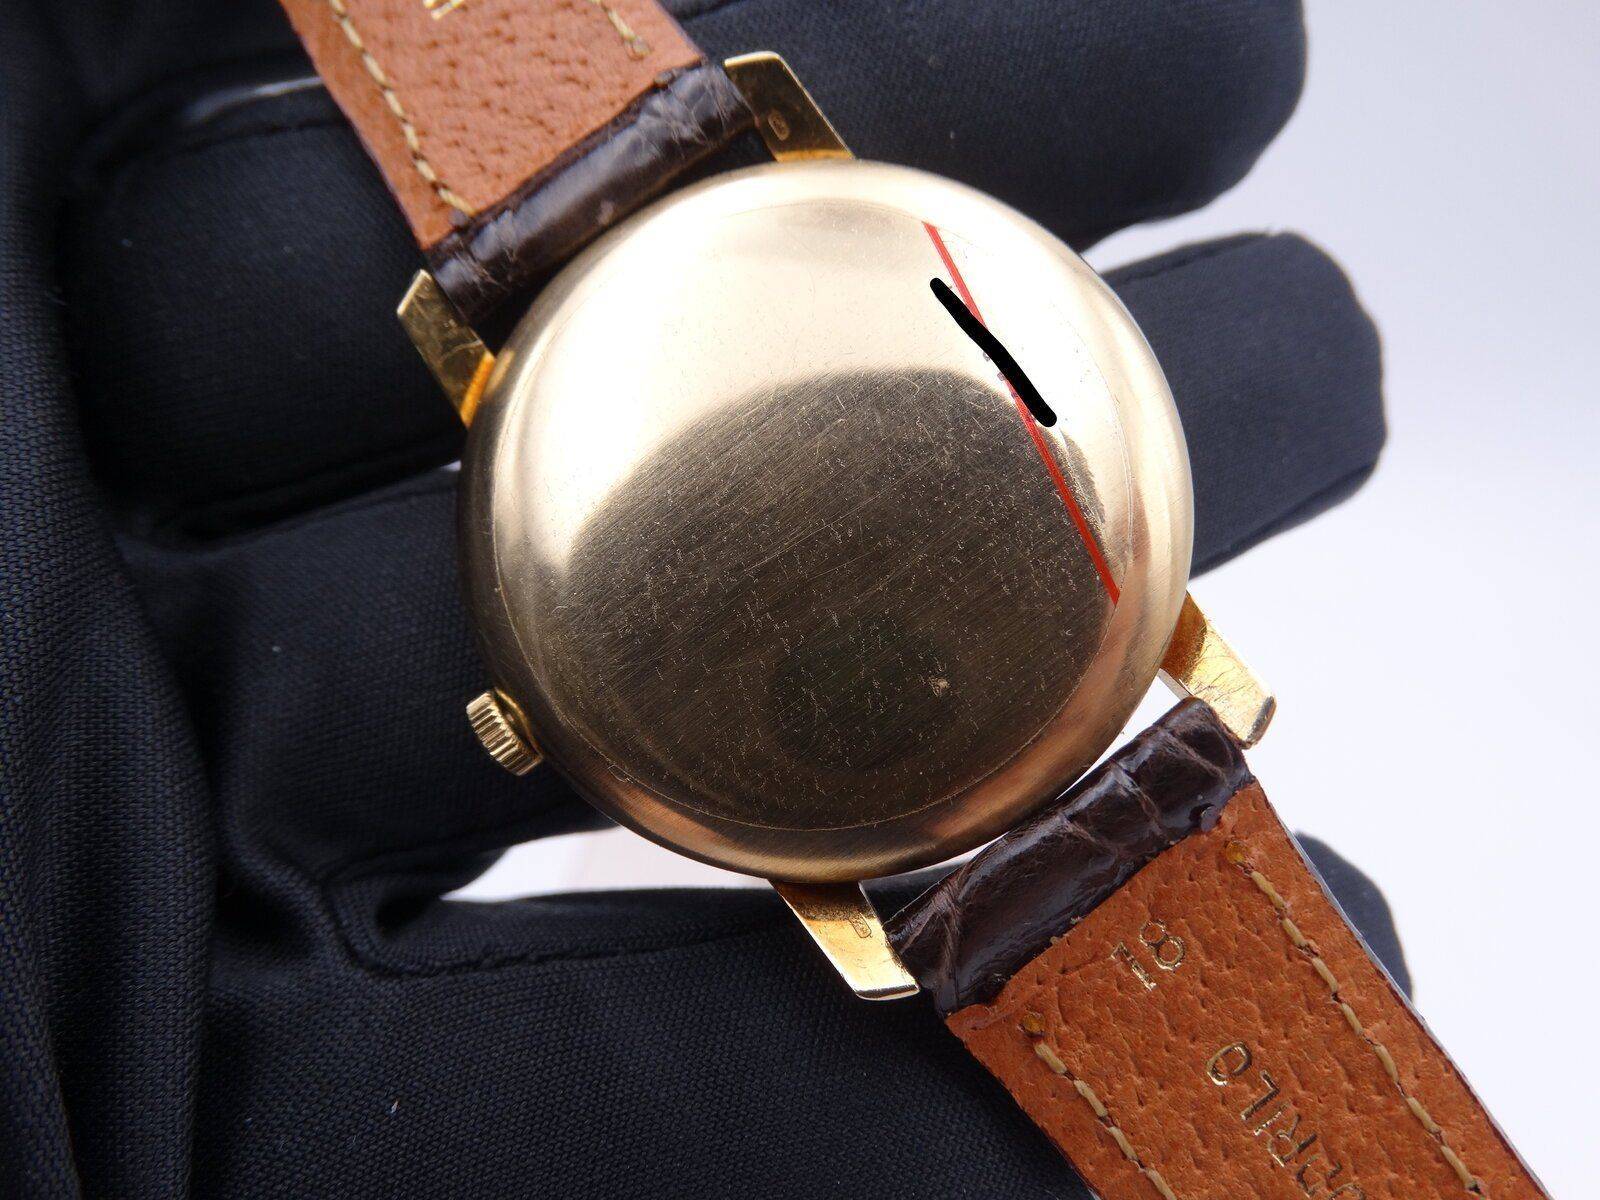 zenith afp brown automatic gold 4836 copia.JPG